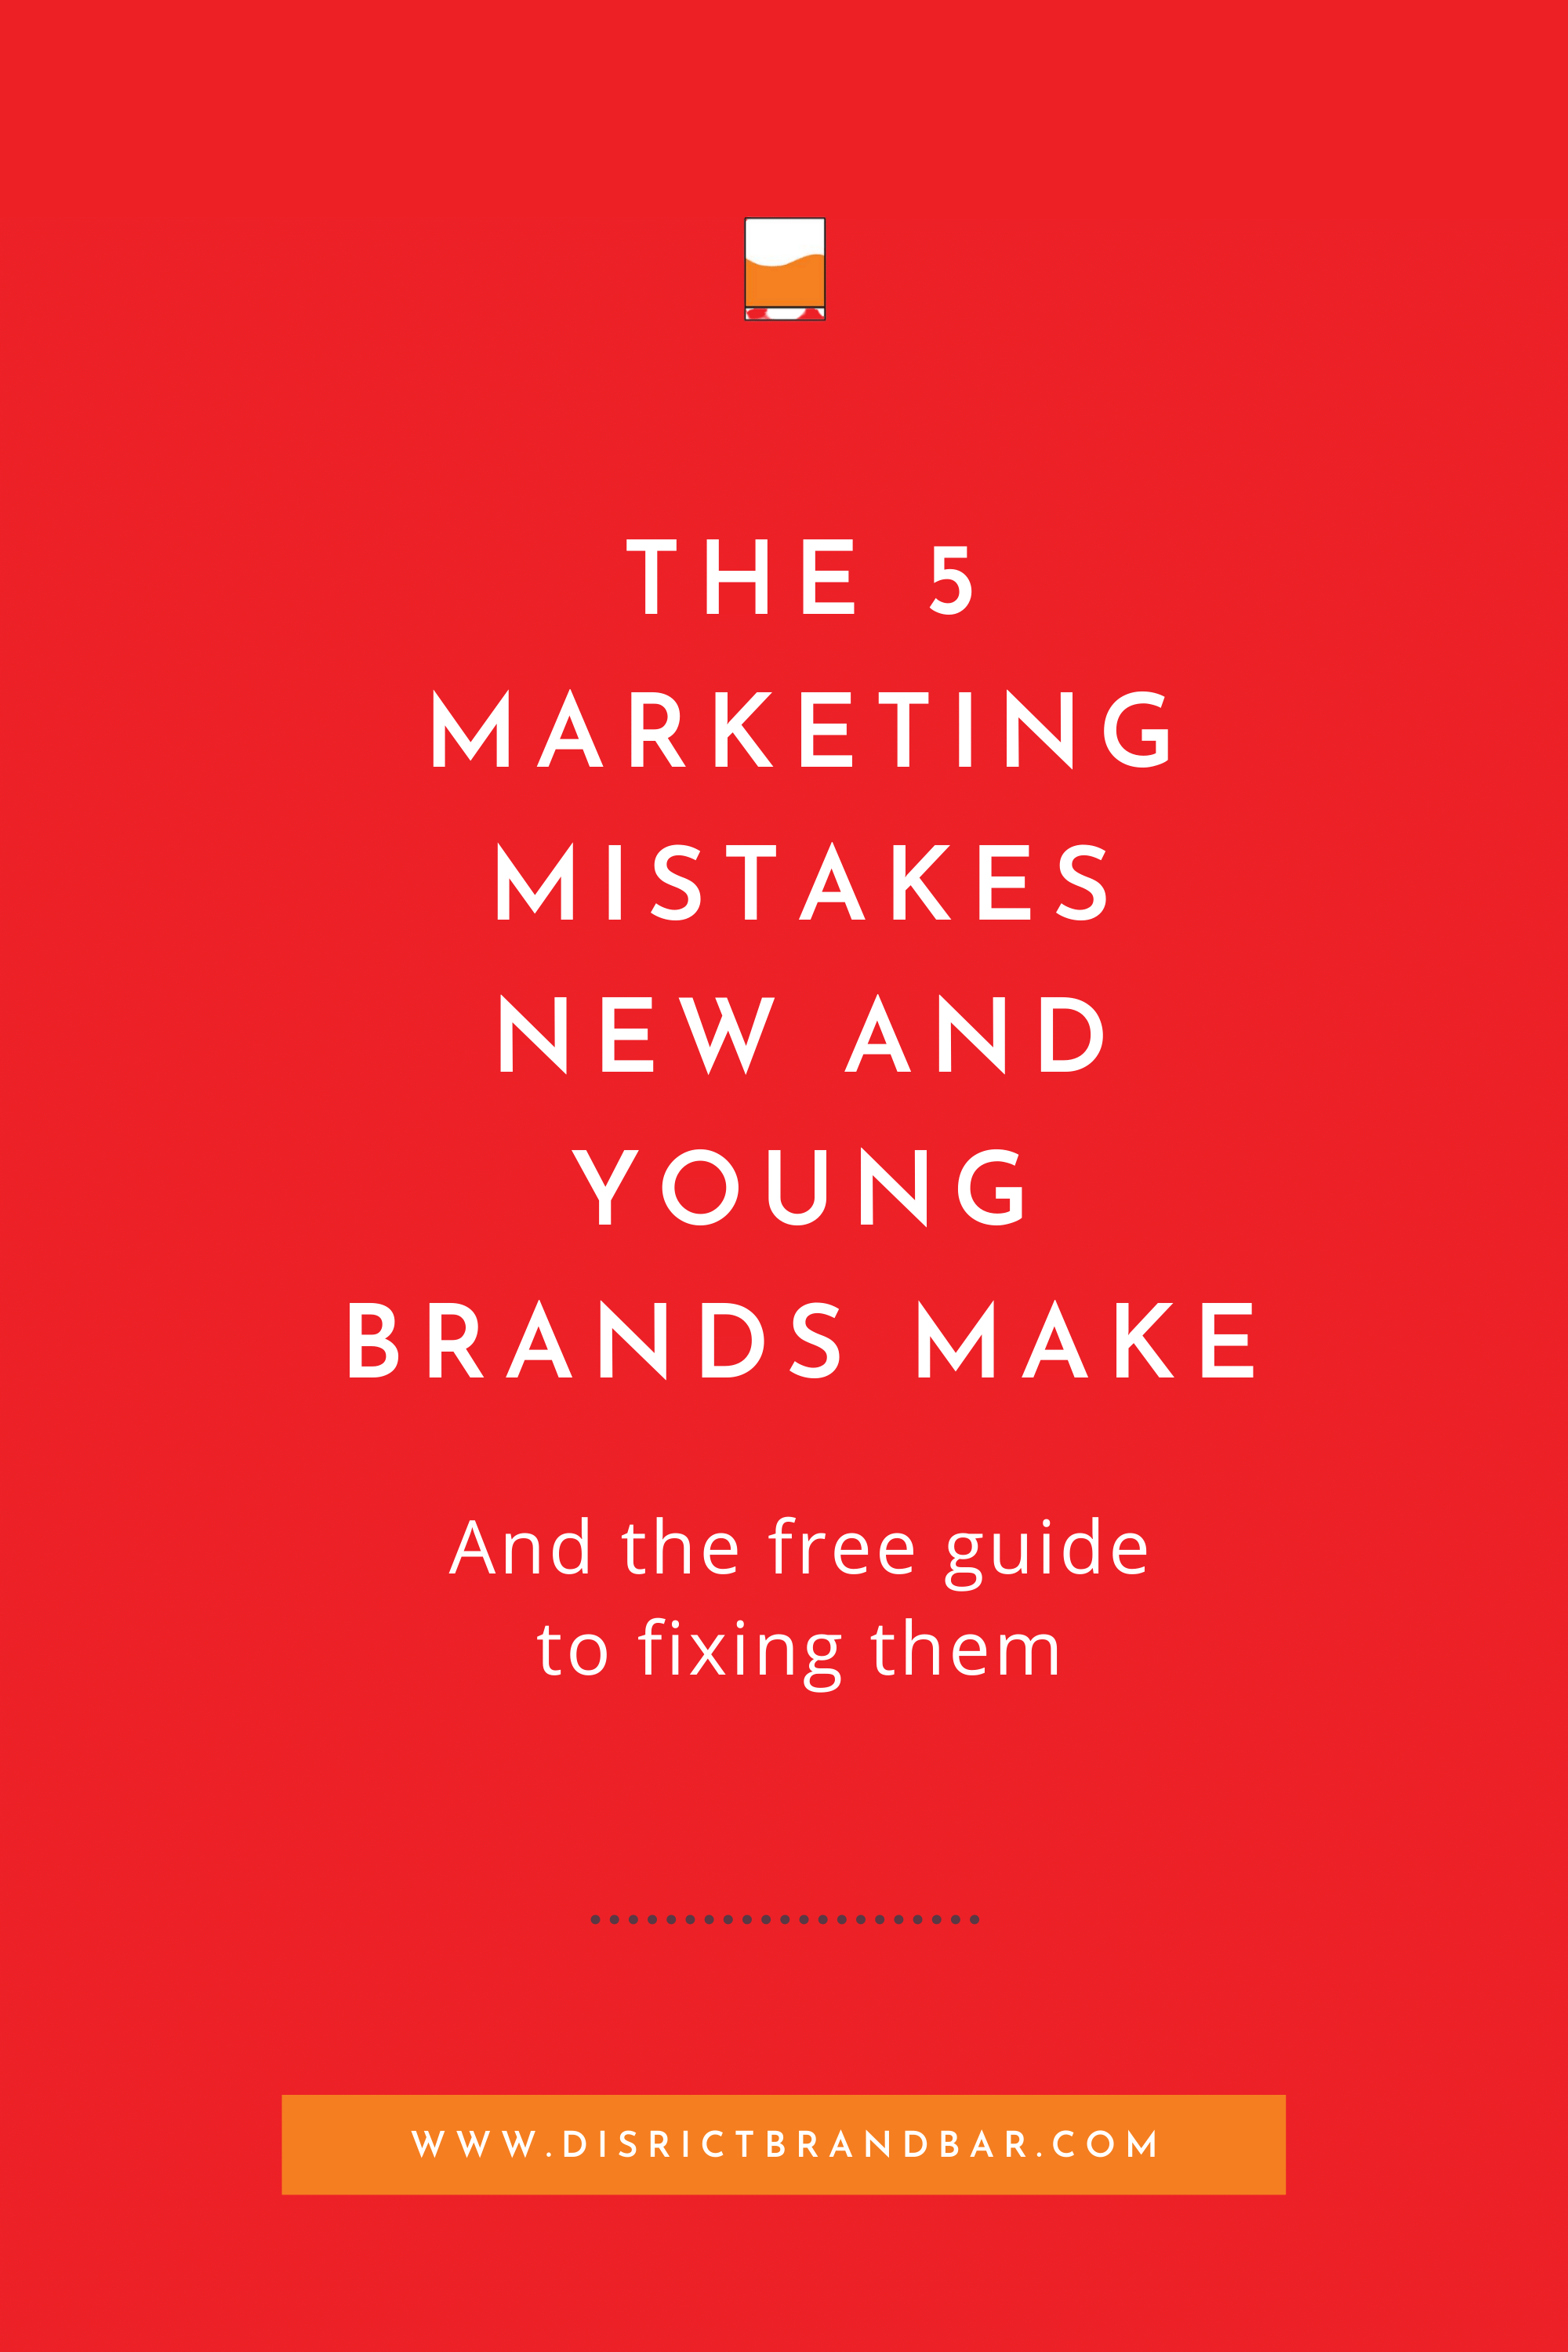 The 5 marketing mistakes new and young brands make